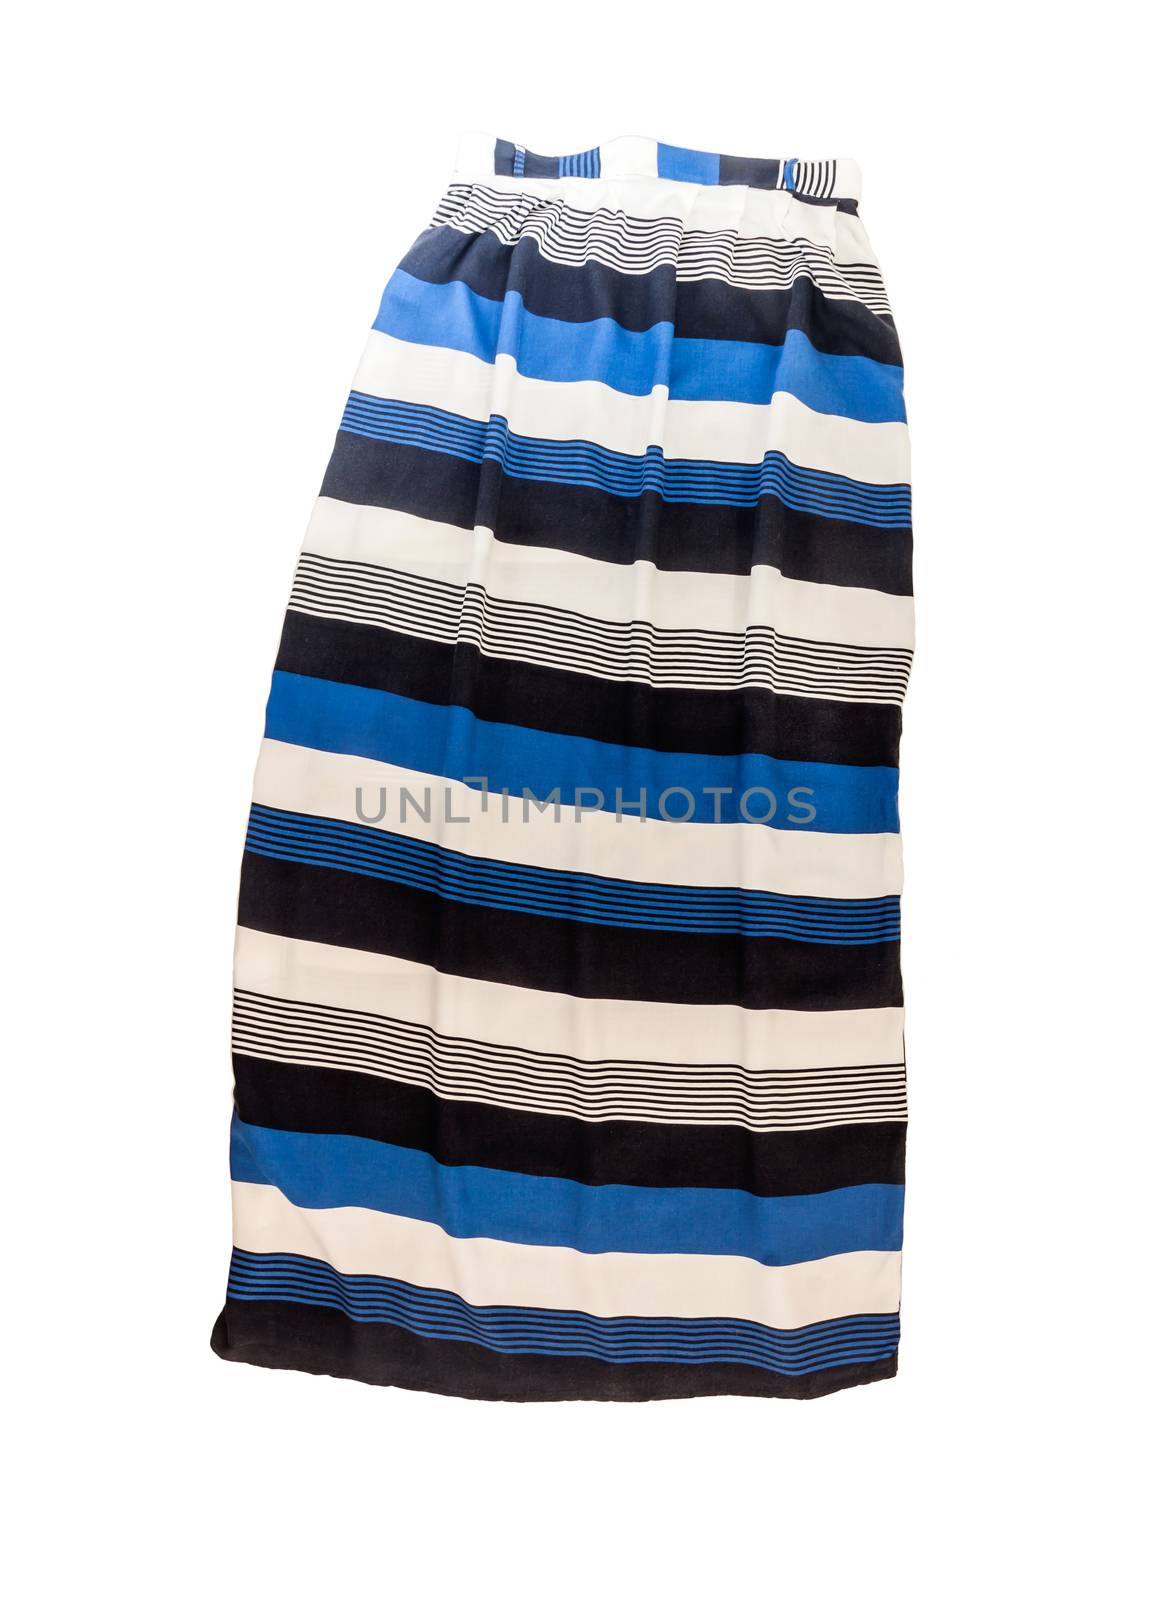 Women's long skirt with a striped multi-colored pattern, isolated on white background.